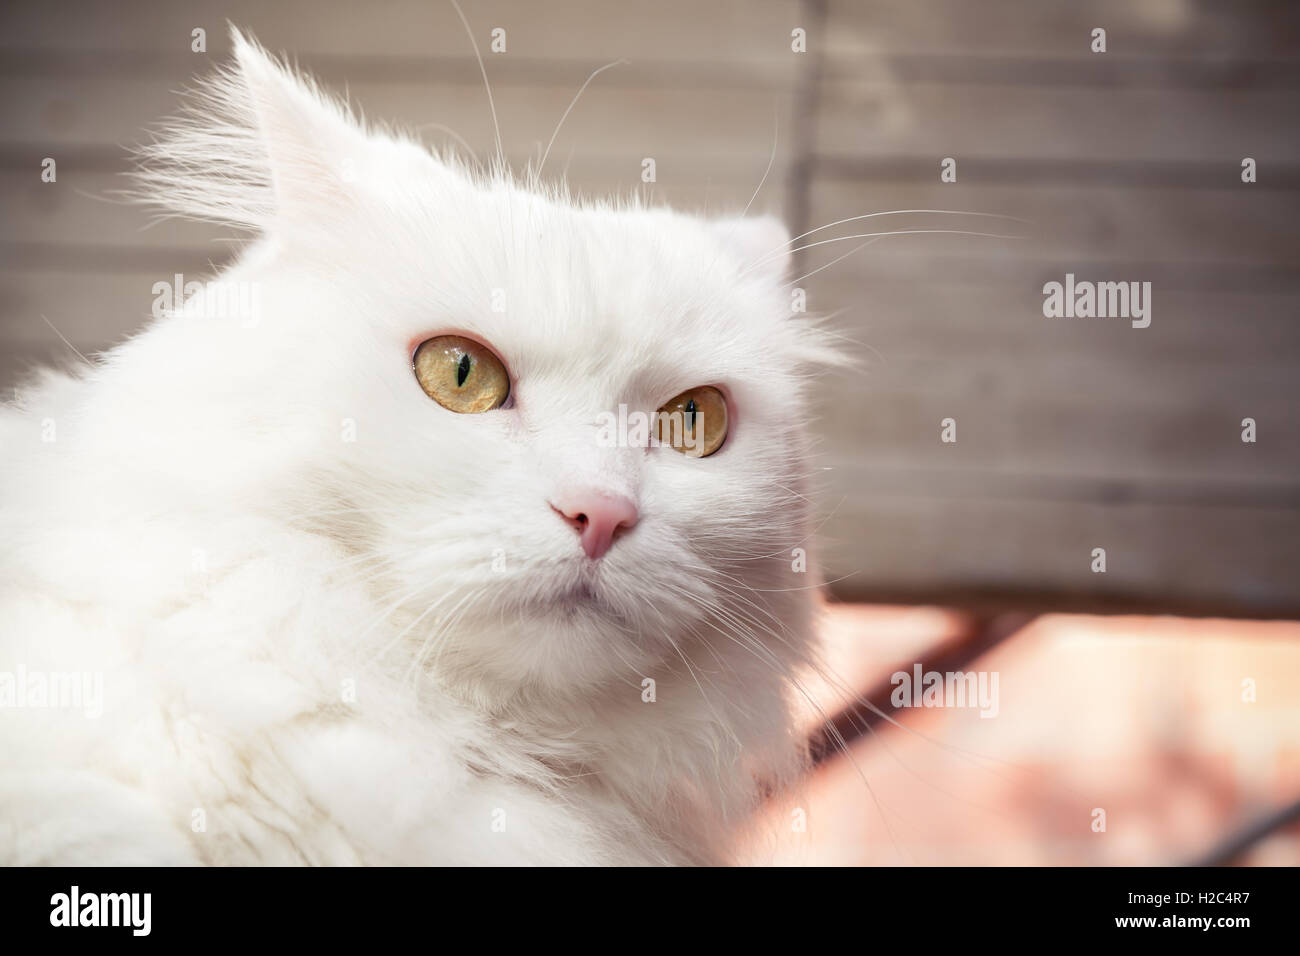 Closeup portrait of white fluffy cat with yellow eyes Stock Photo